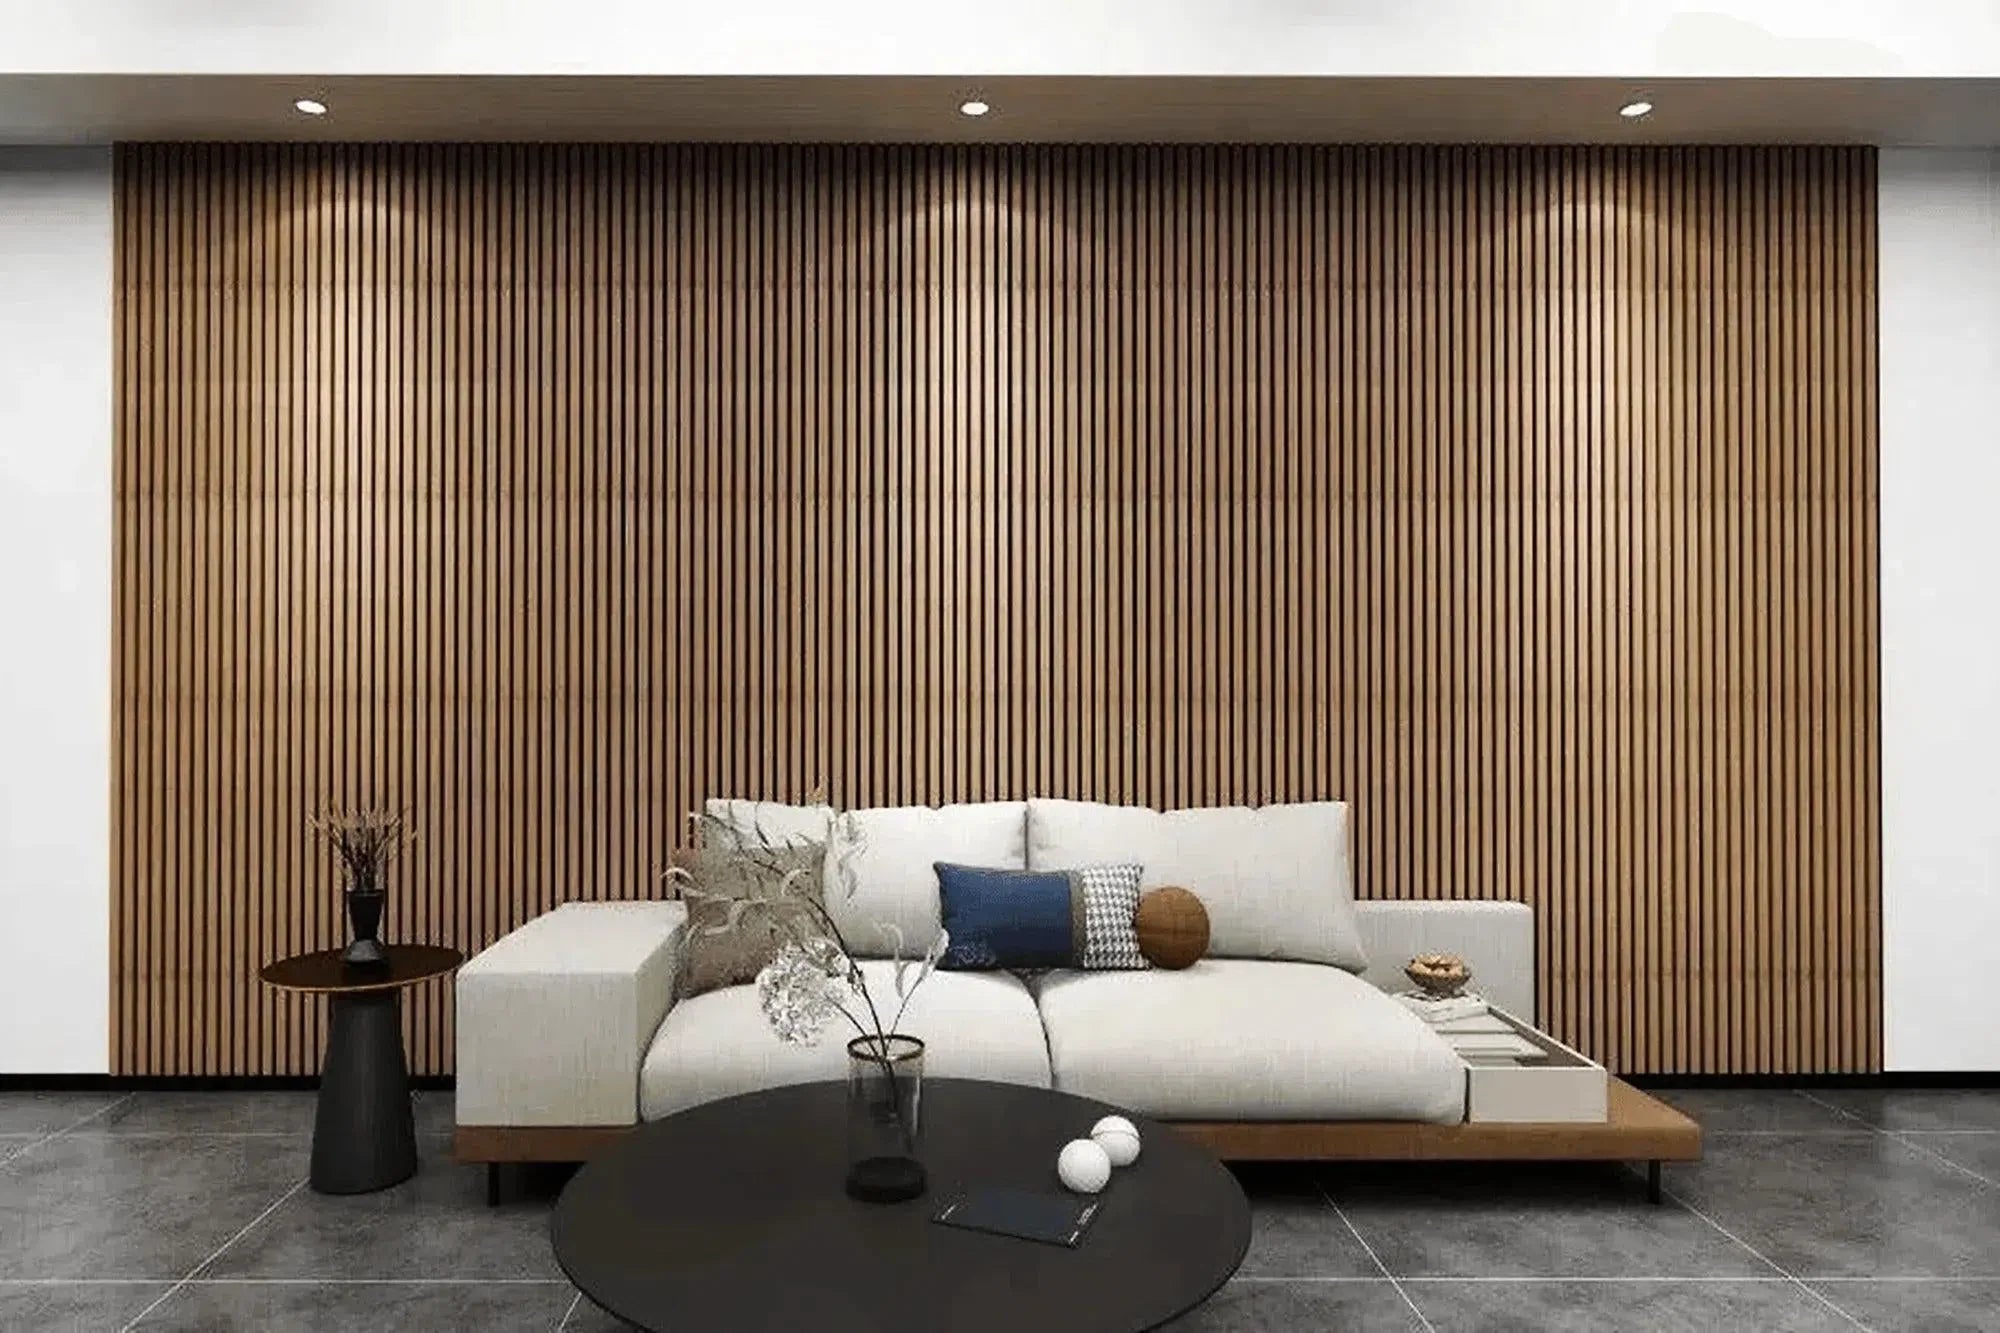 DIY Projects Using Acoustic Wall Panels